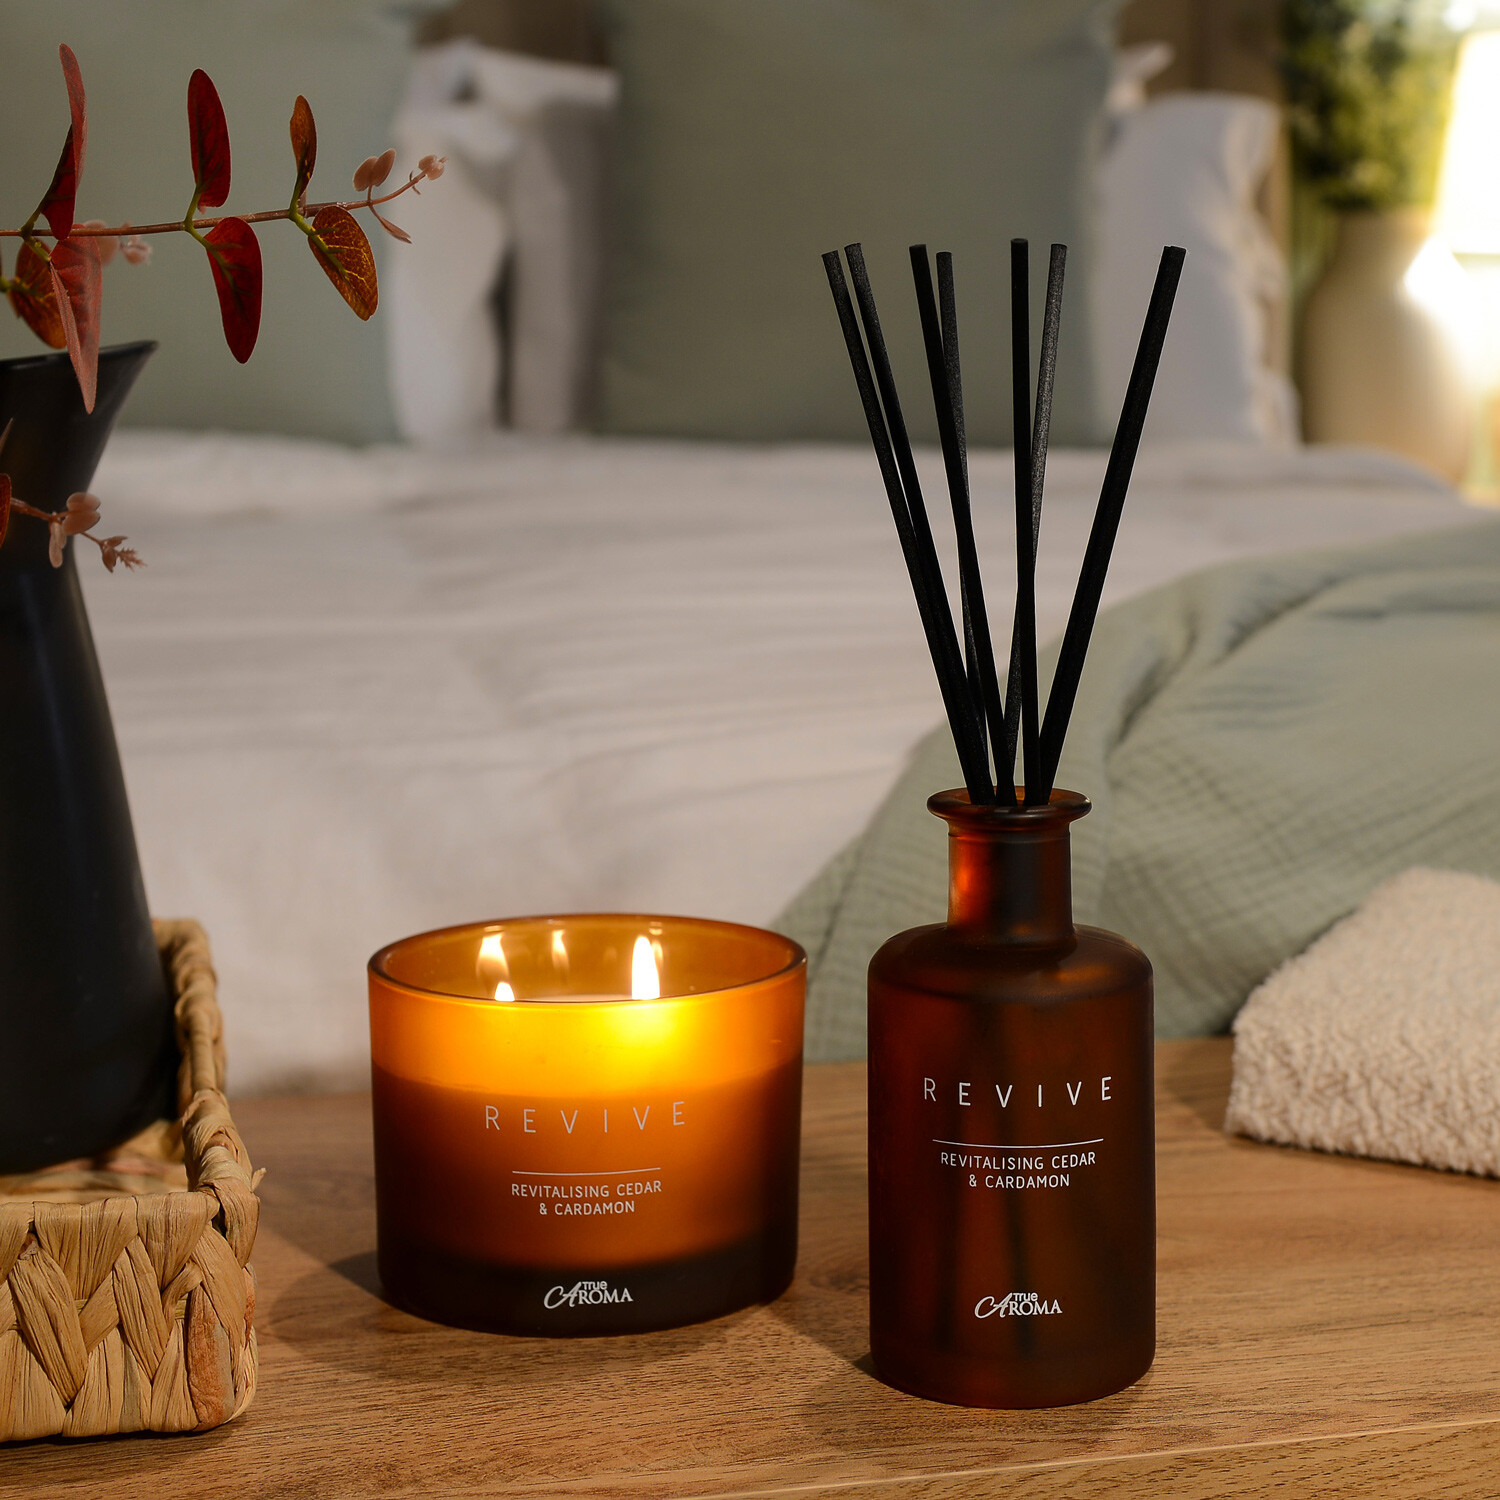 True Aroma Revive Cedar and Cardamom Scented Candle Image 2